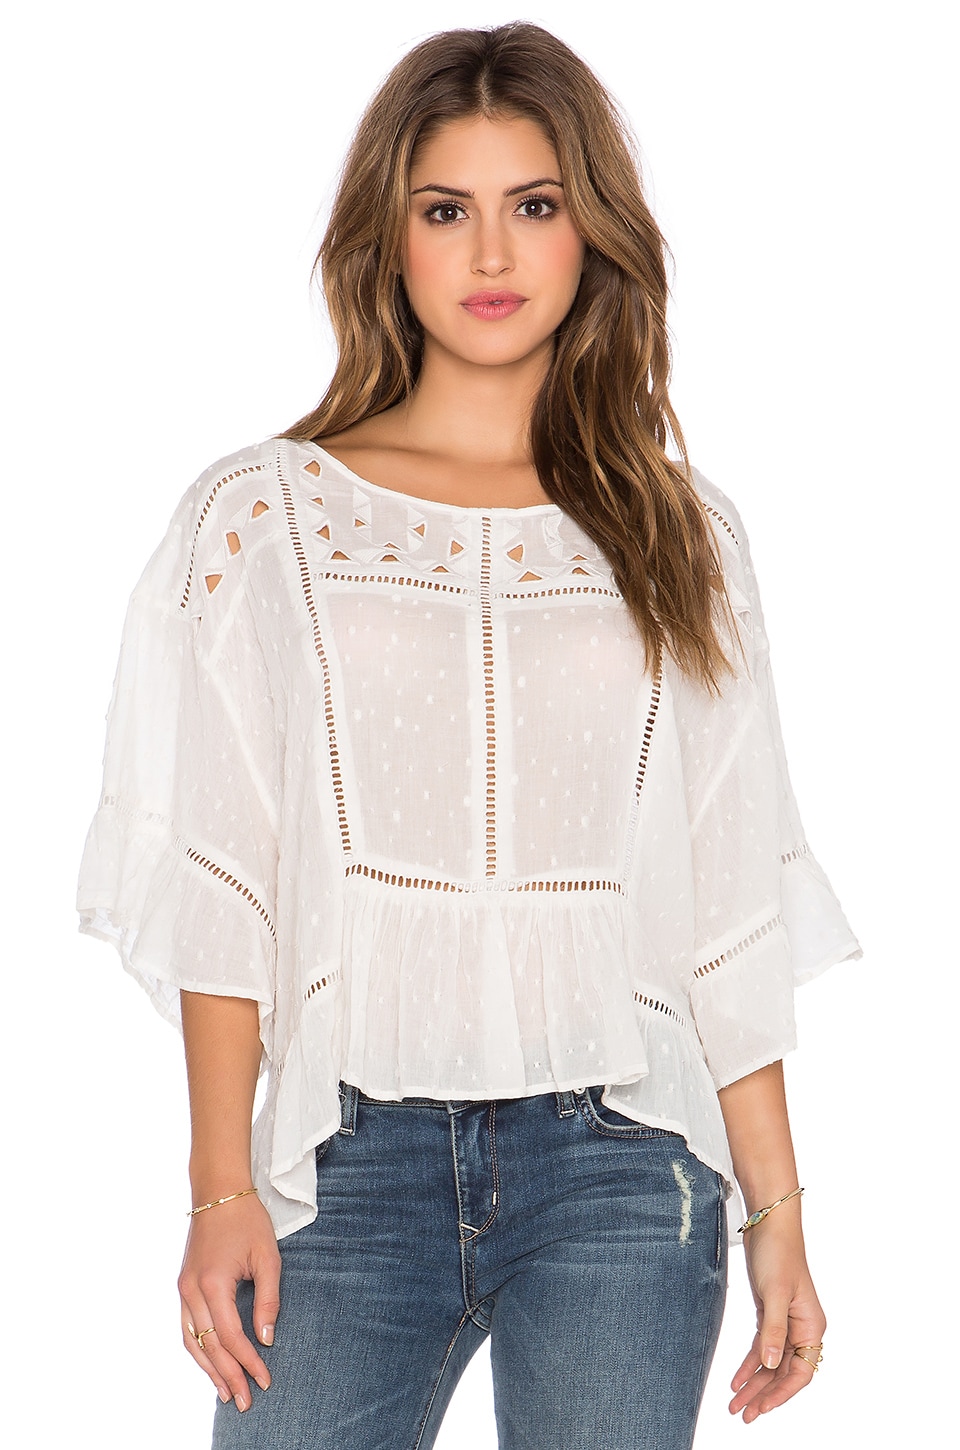 Free People Beautiful Dream Top in Ivory | REVOLVE